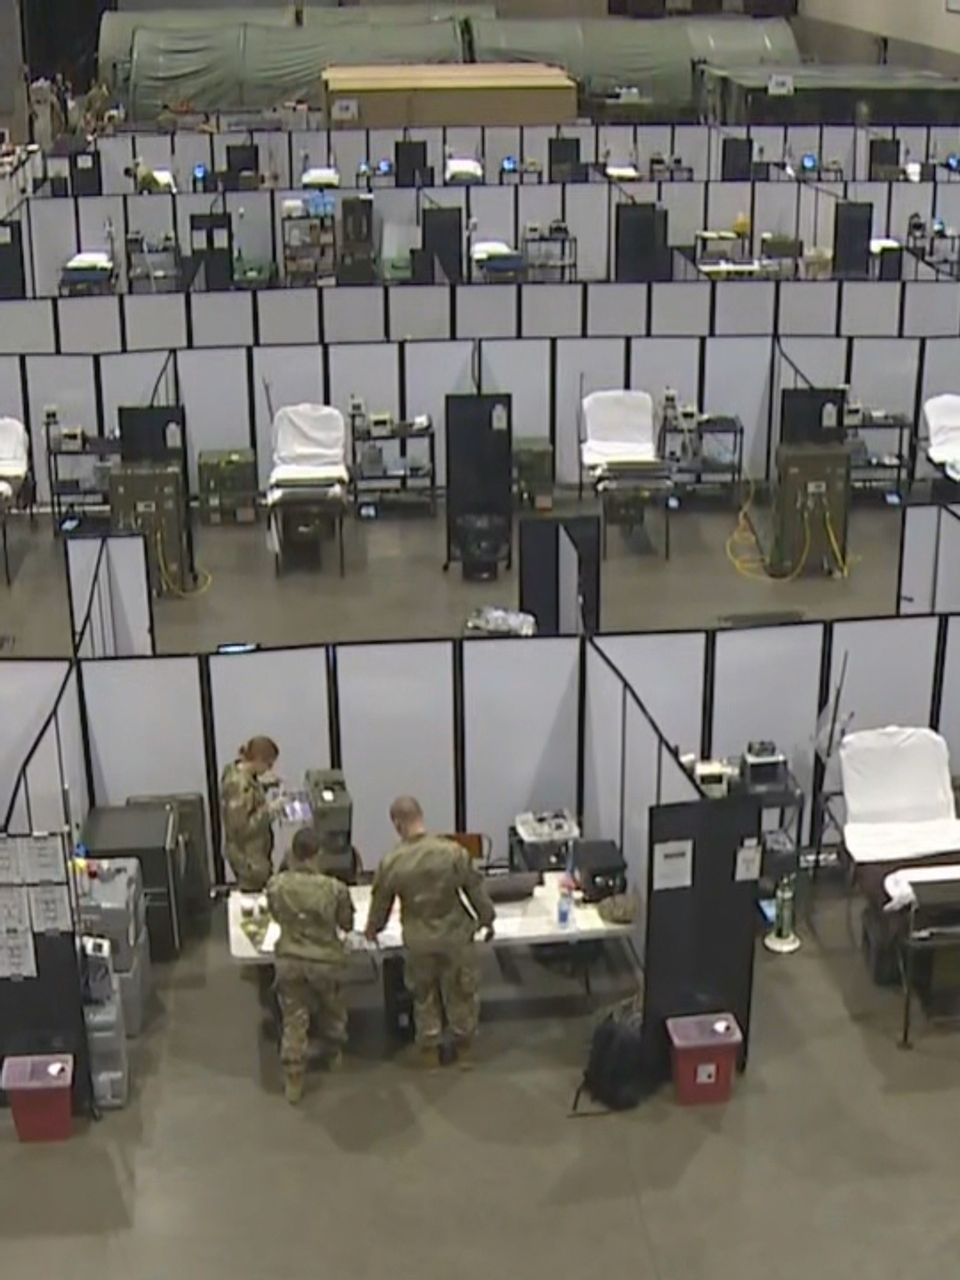 Field Hospital At Centurylink Event Center To Be Redeployed To A